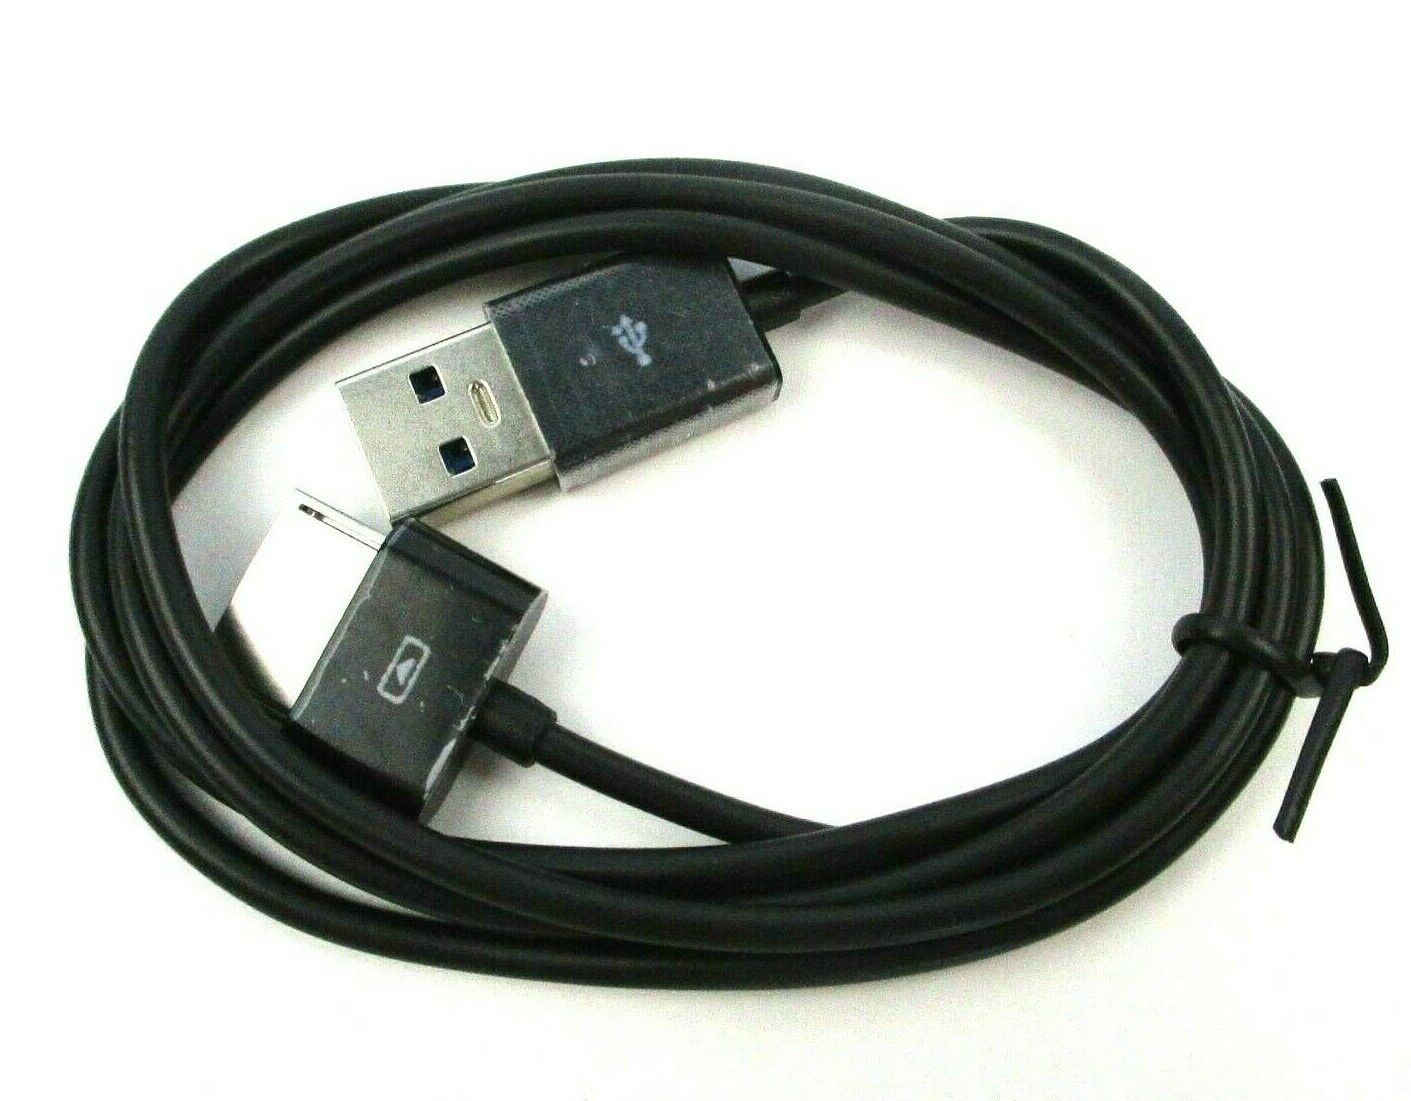 USB DC 3.0 Charger Cable Data For ASUS VivoTab RT TF600 TF600T TF810C TF701 D14